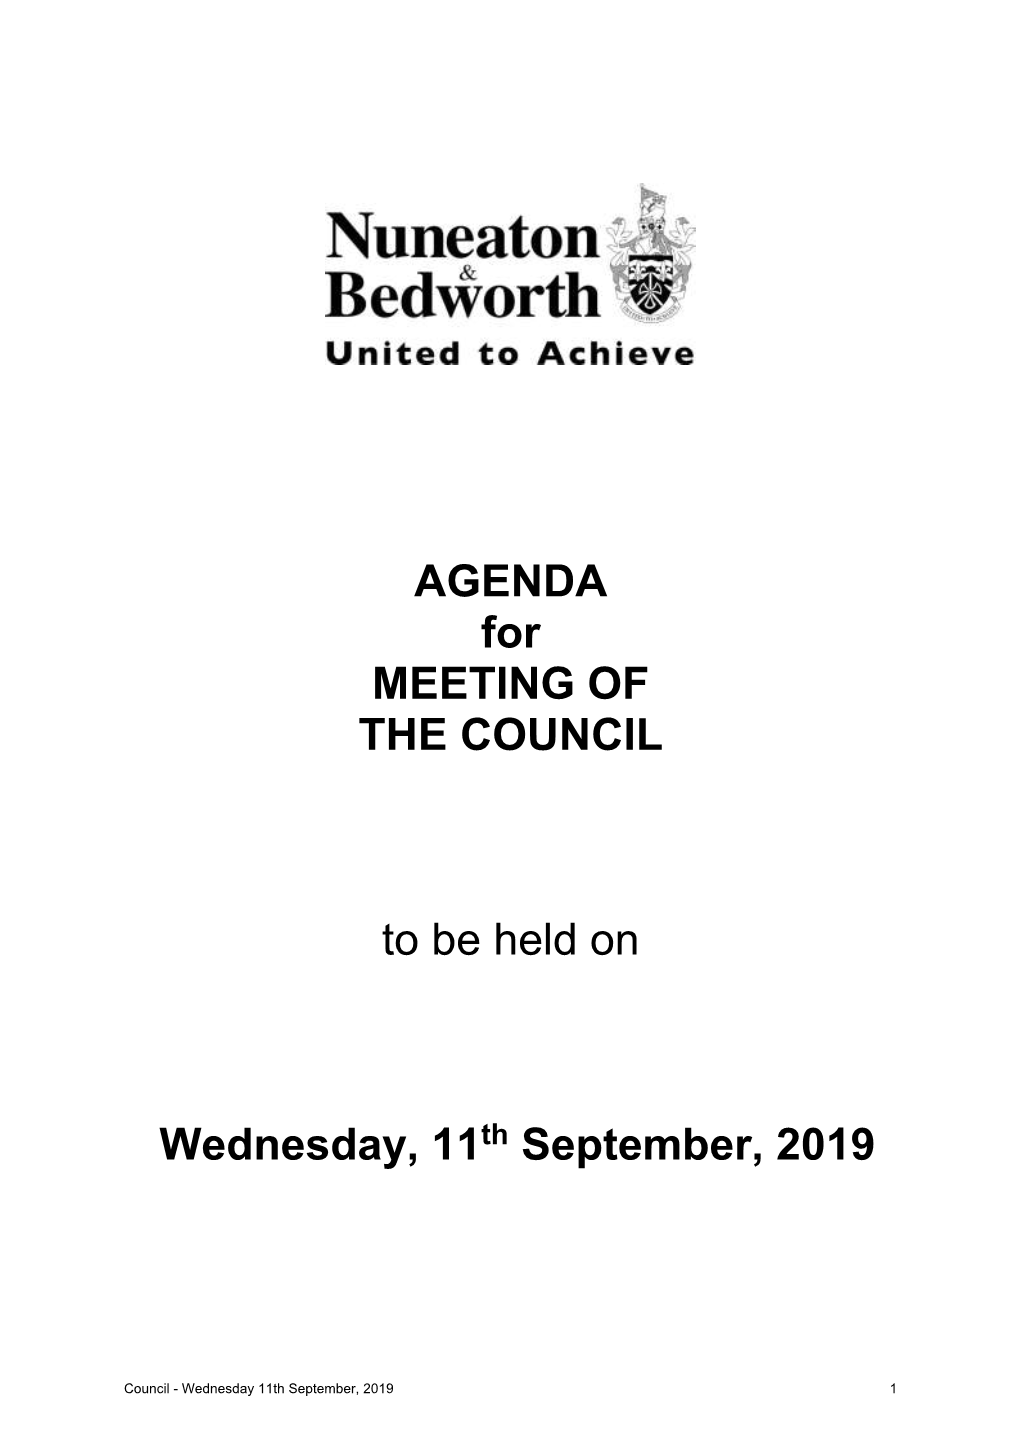 AGENDA for MEETING of the COUNCIL to Be Held On